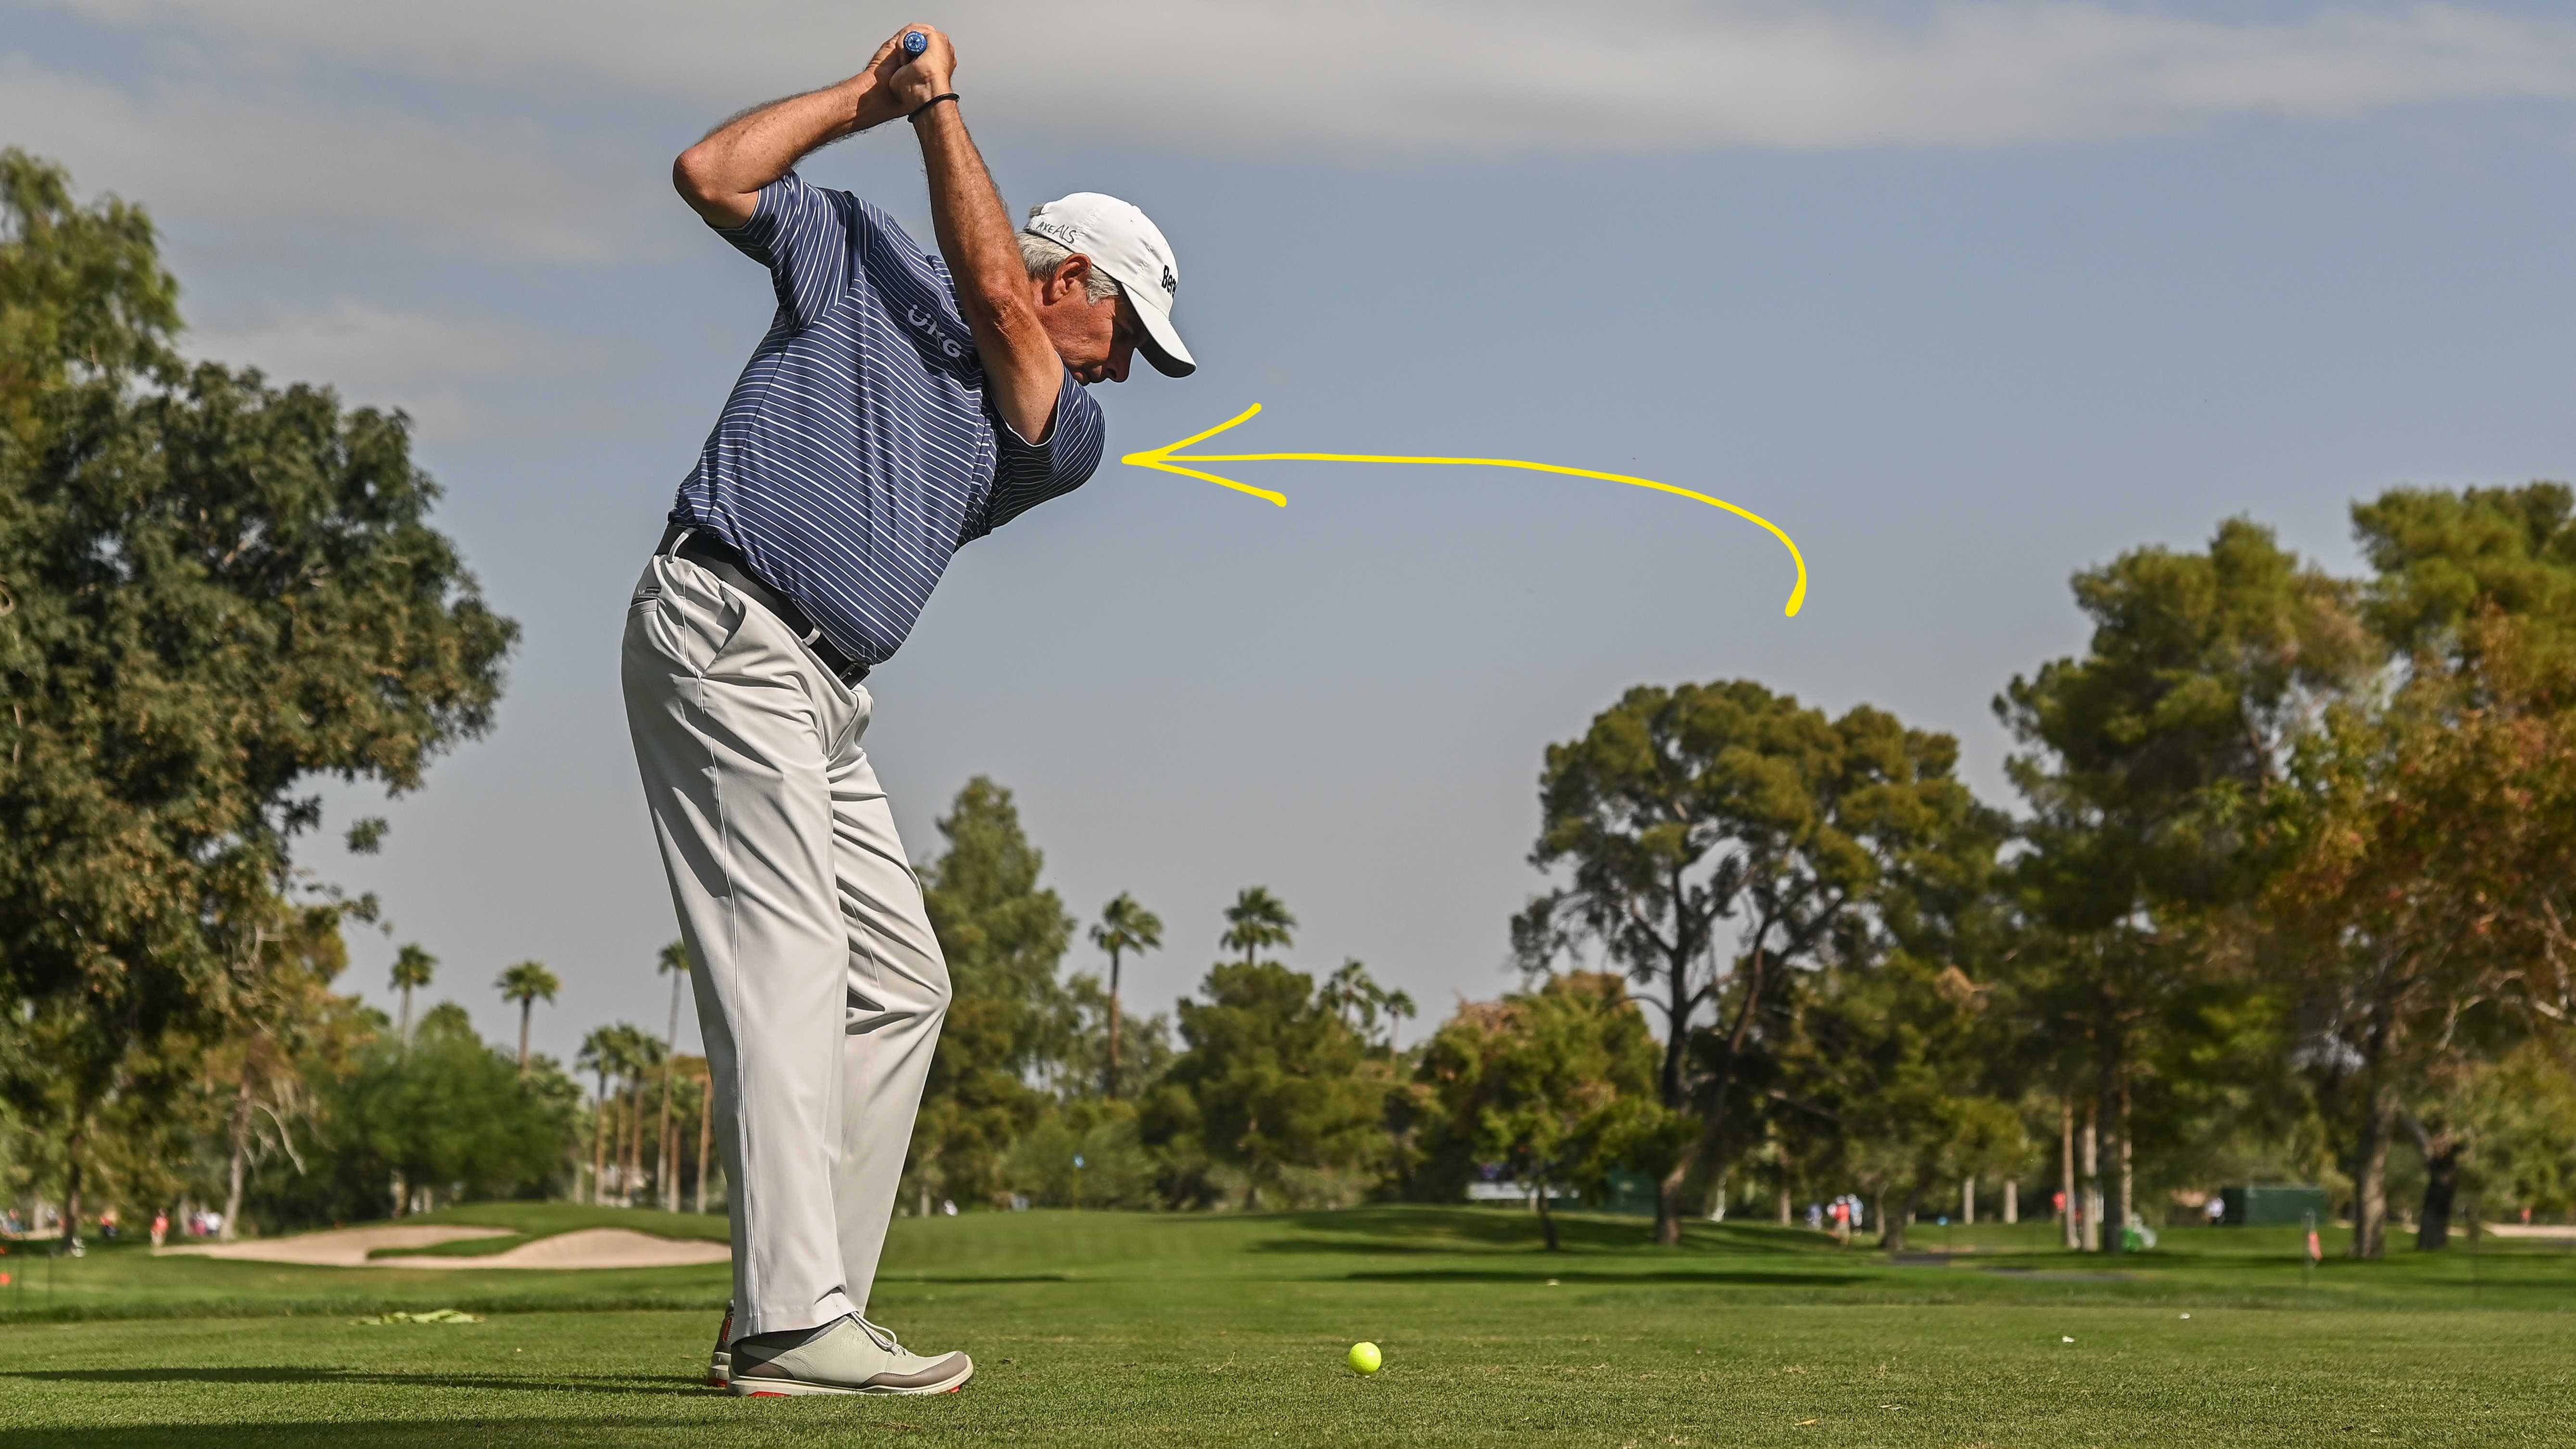 Swing advice is not one size fits all – GolfWRX